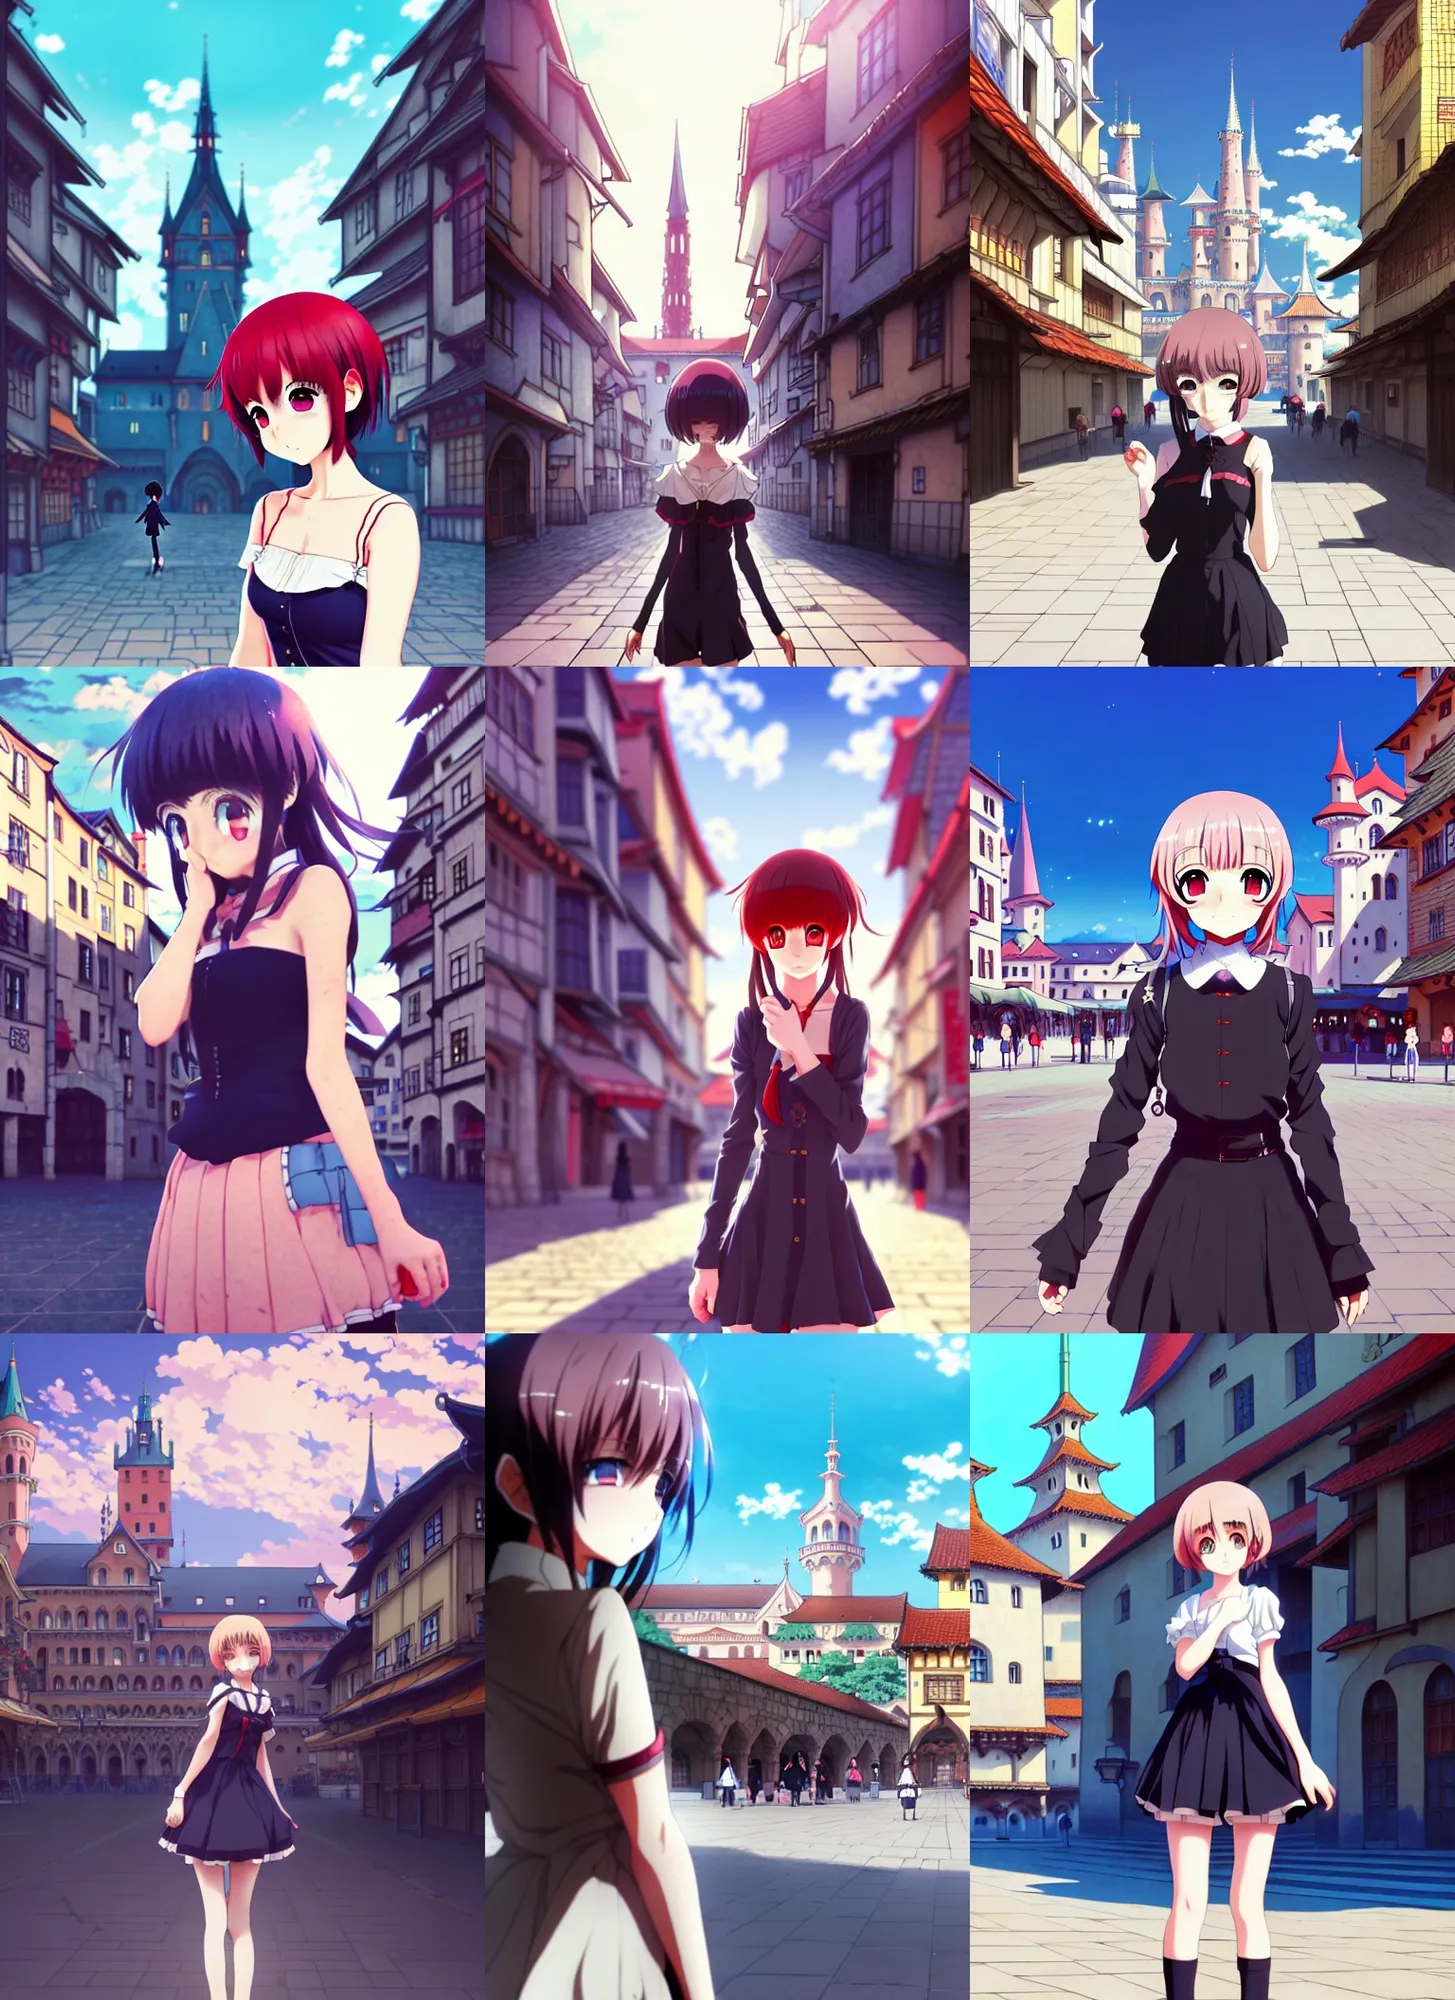 Prompt: anime frames, anime visual, full body portrait of a young woman in the medieval city square looking at the fantasy palace in the distance, cute face by ilya kuvshinov, masakazu katsura, dynamic pose, dynamic perspective, rounded eyes, moody, kyoani, yoh yoshinari